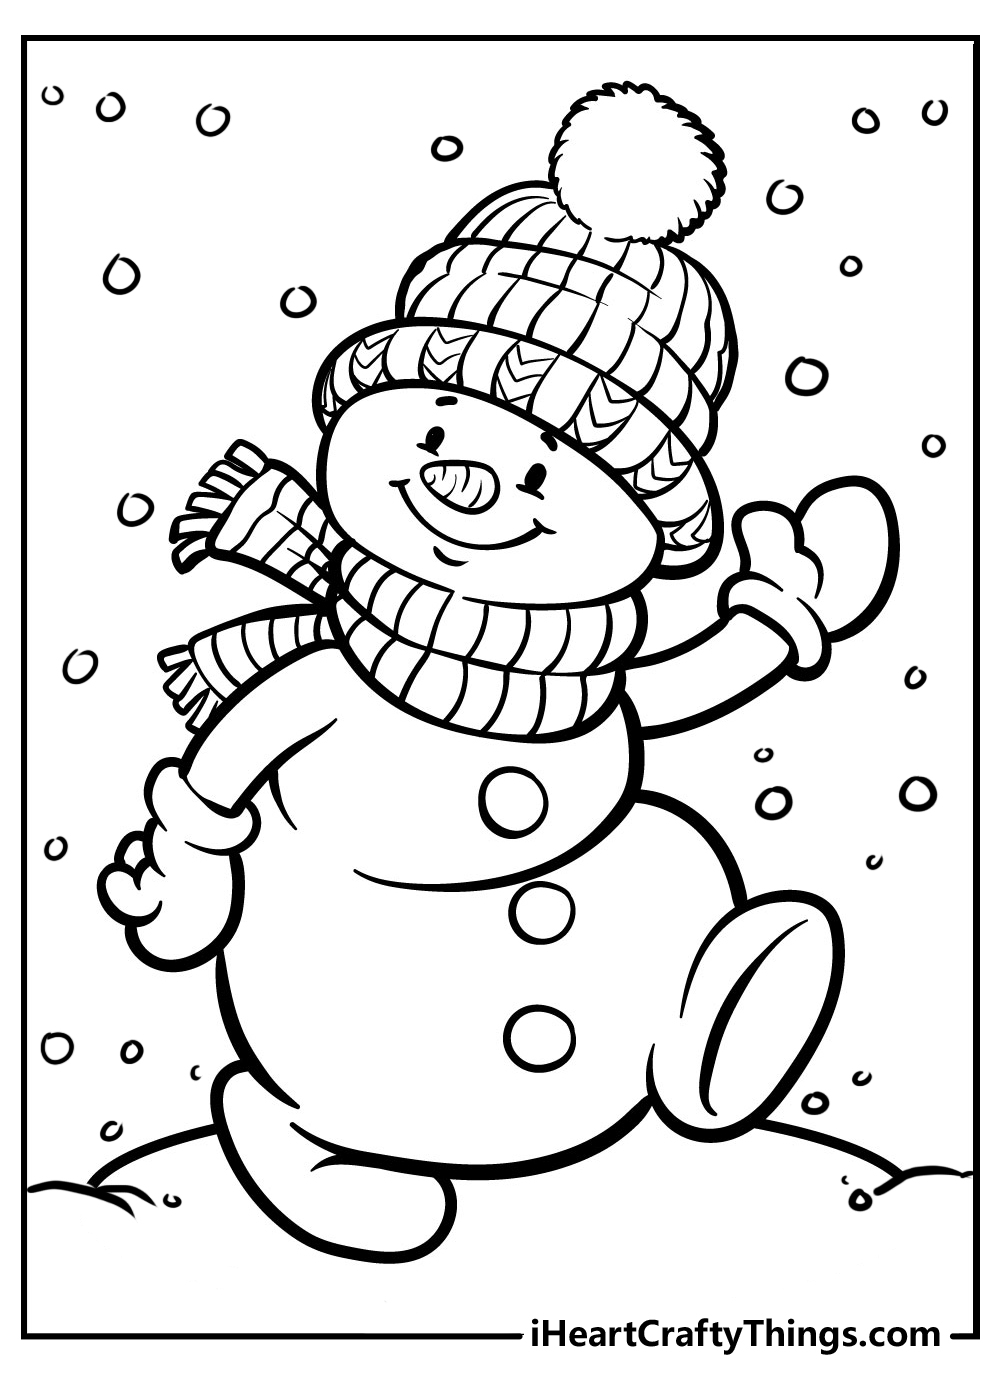 Printables snowman coloring pages coloring pages winter christmas coloring sheets